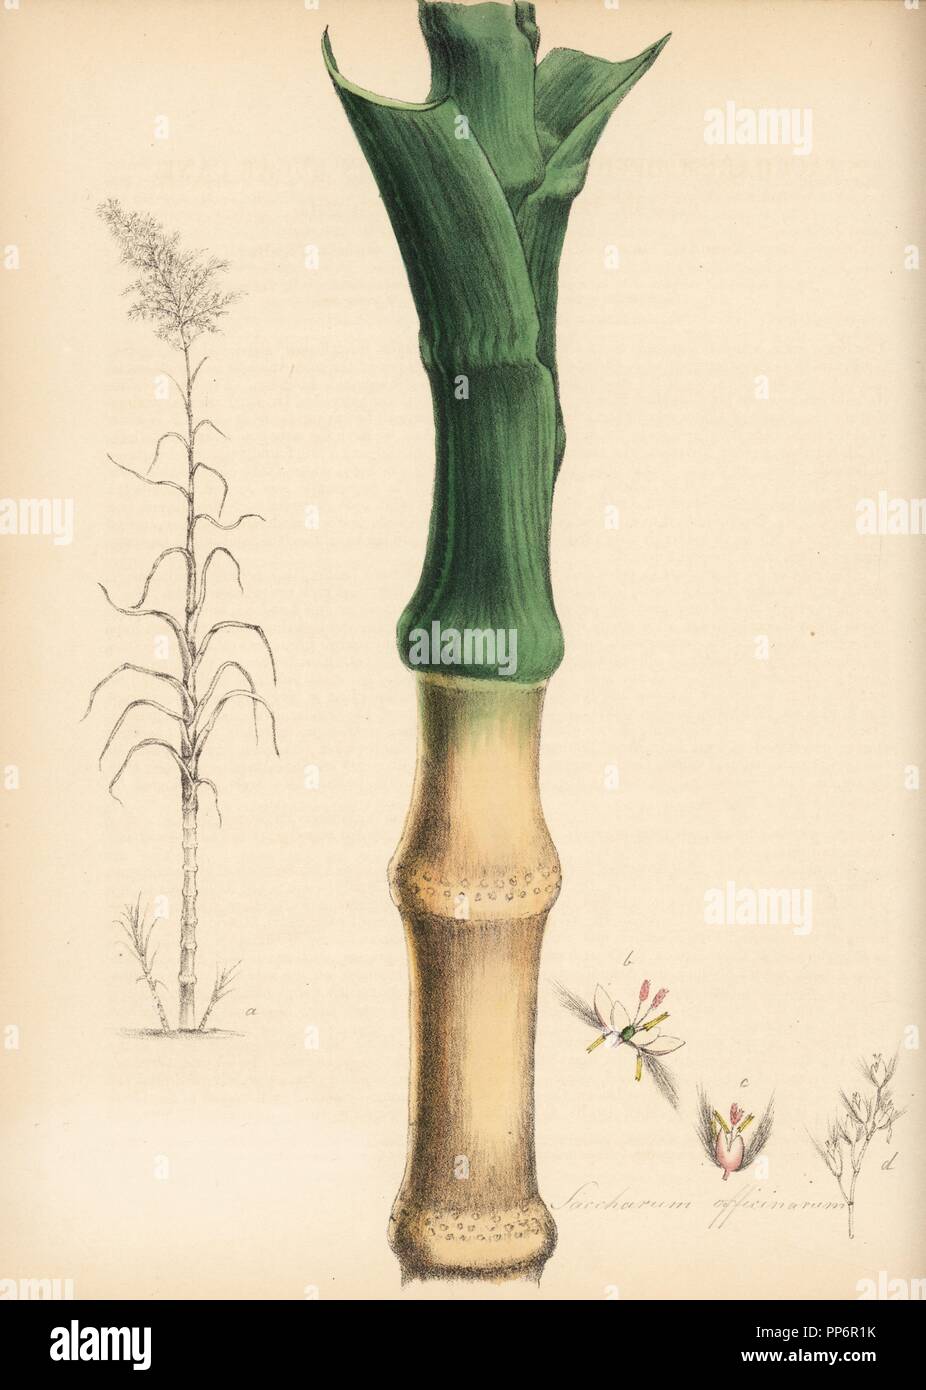 Sugarcane, Saccharum officinarum, with cane stem and leaf, and engraving of entire plant. Handcoloured zincograph by Chabots drawn by Miss M. A. Burnett from her 'Plantae Utiliores: or Illustrations of Useful Plants,' Whittaker, London, 1842. Miss Burnett drew the botanical illustrations, but the text was chiefly by her late brother, British botanist Gilbert Thomas Burnett (1800-1835). Stock Photo